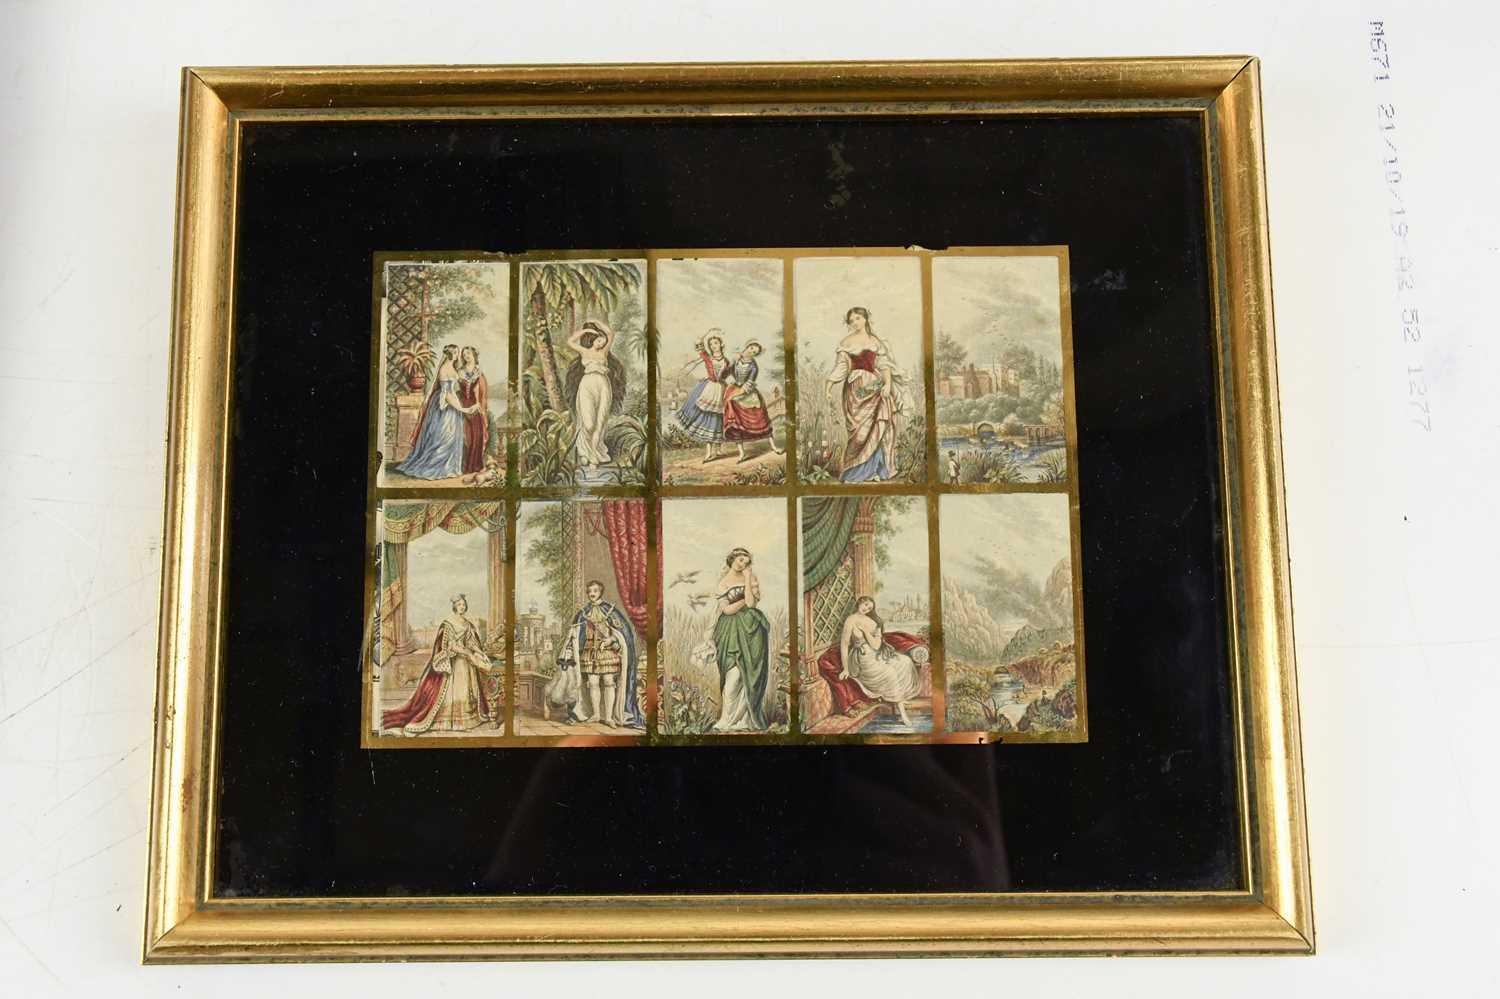 Two 19th century prints, 'The Sailor's Departure', and 'Blowing Bubbles', 18 x 22cm, in maple - Image 2 of 6